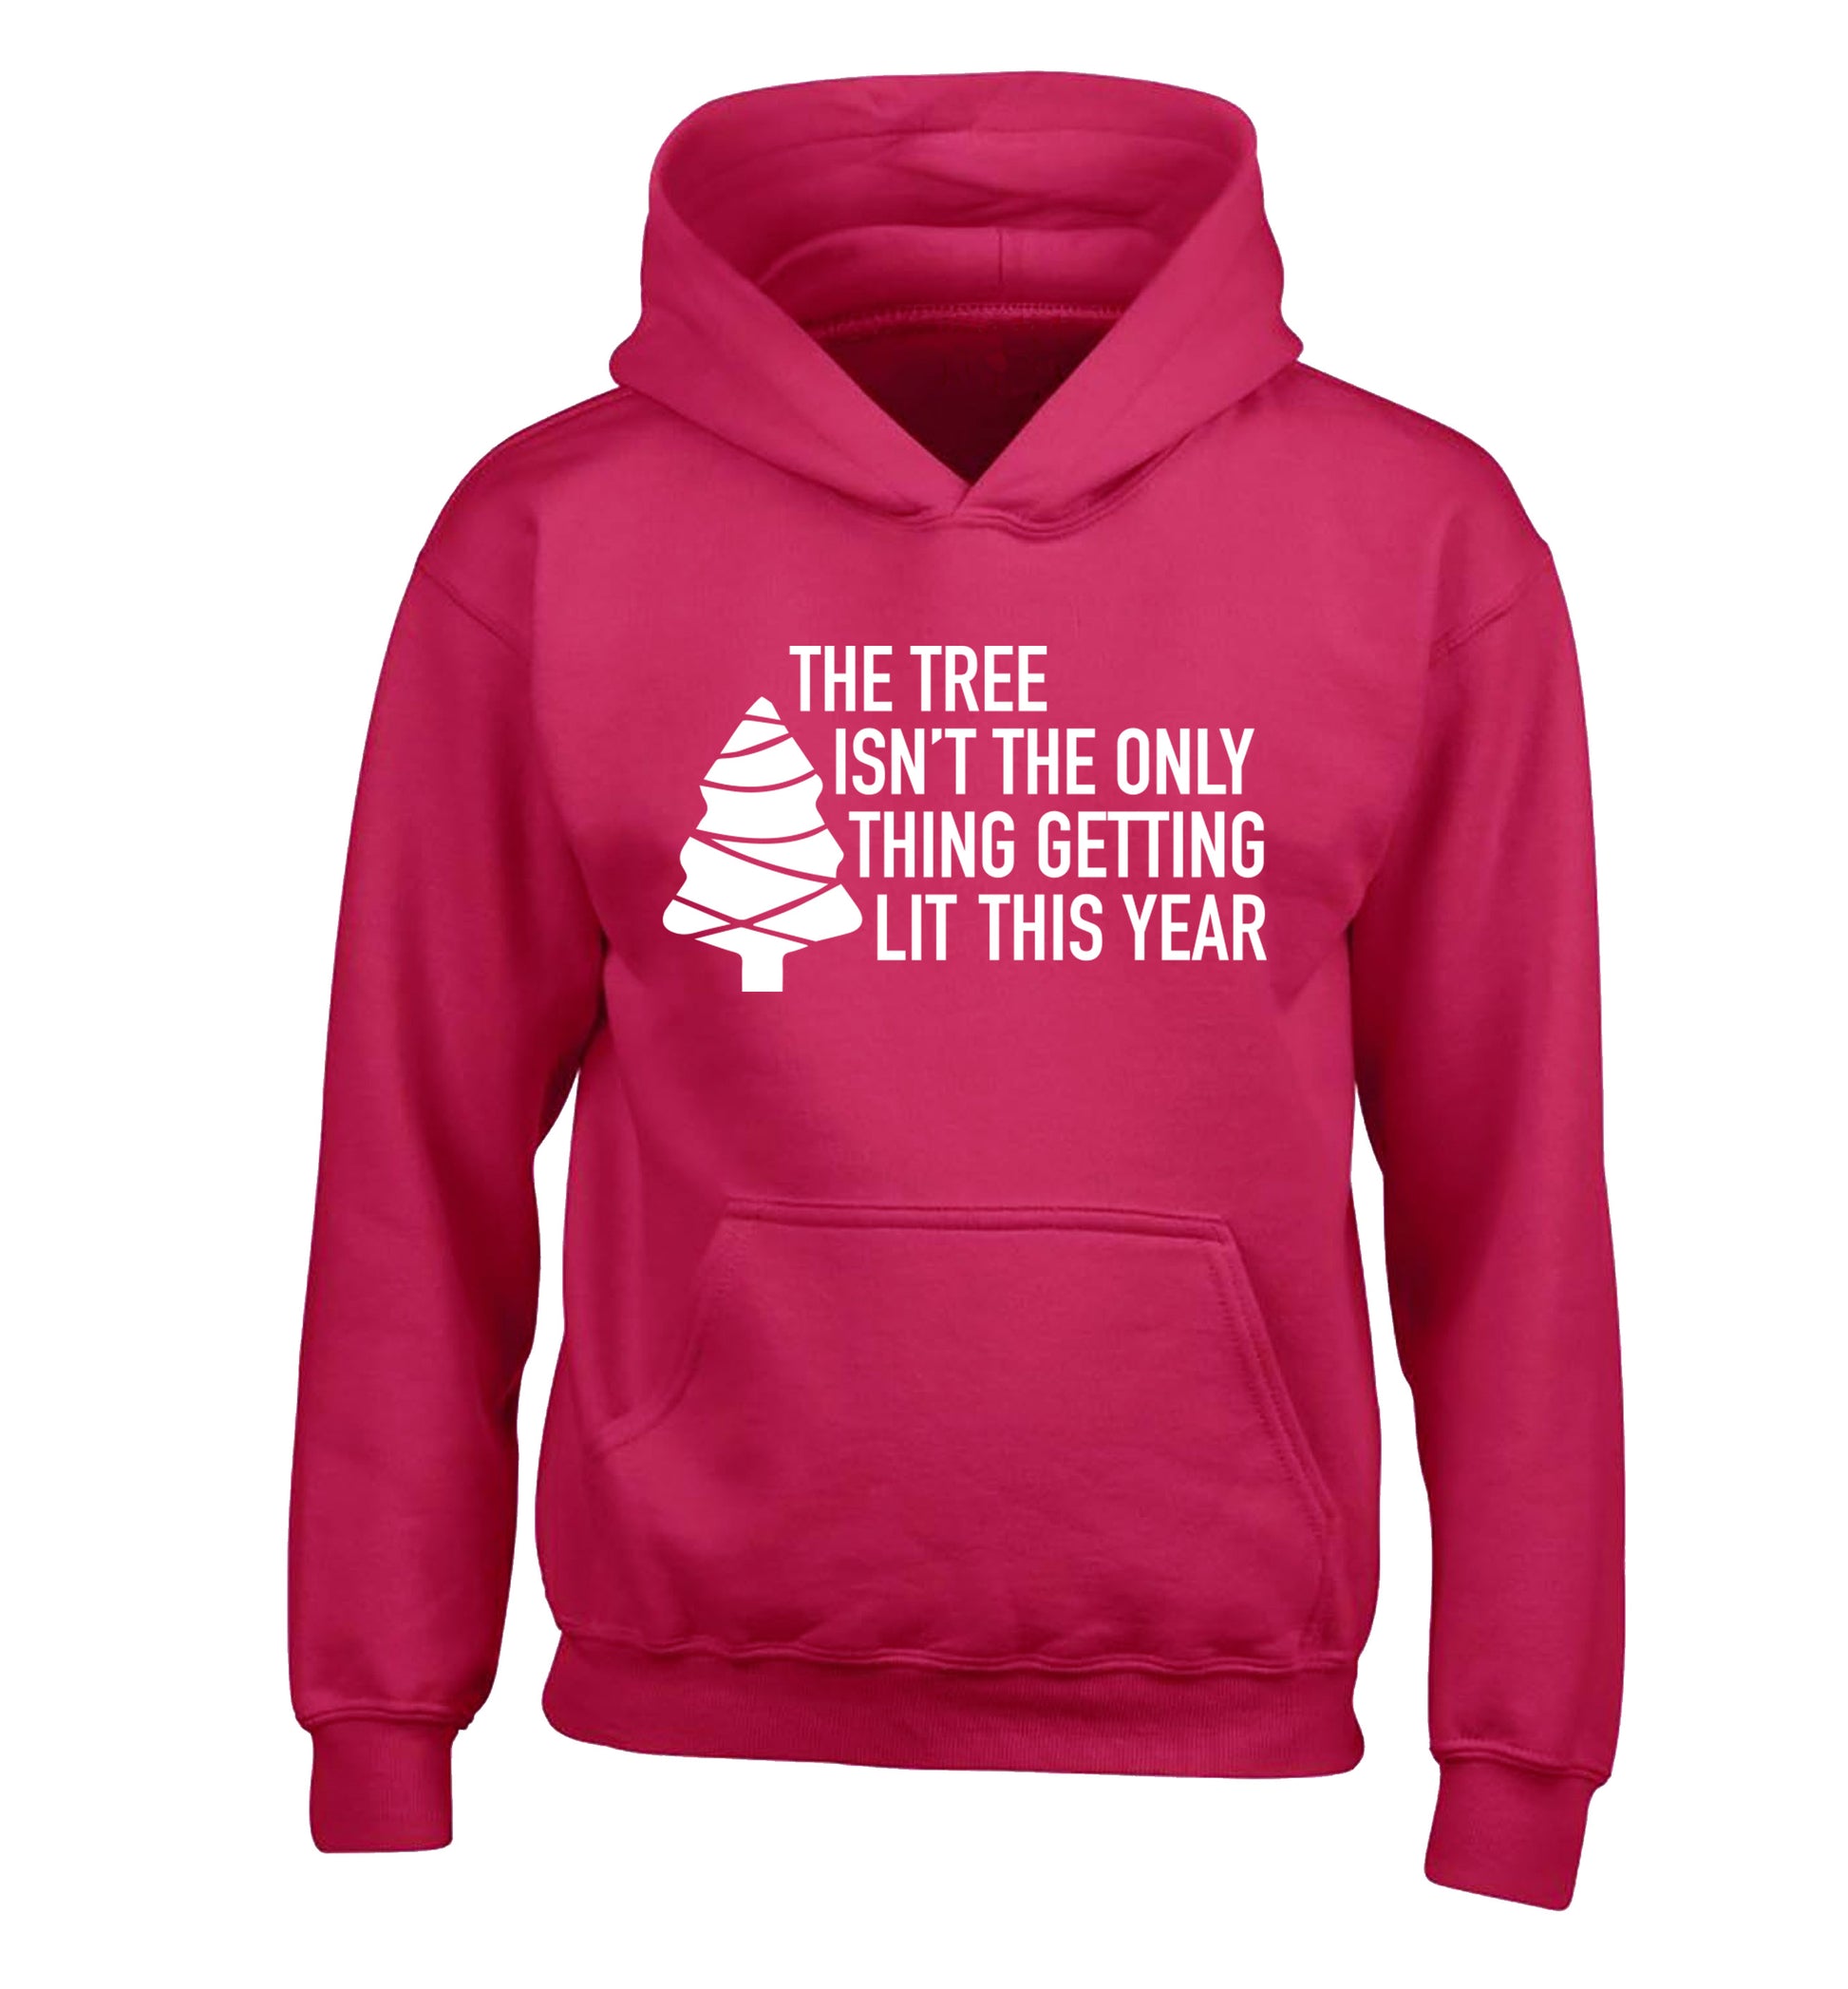 The tree isn't the only thing getting lit this year children's pink hoodie 12-14 Years